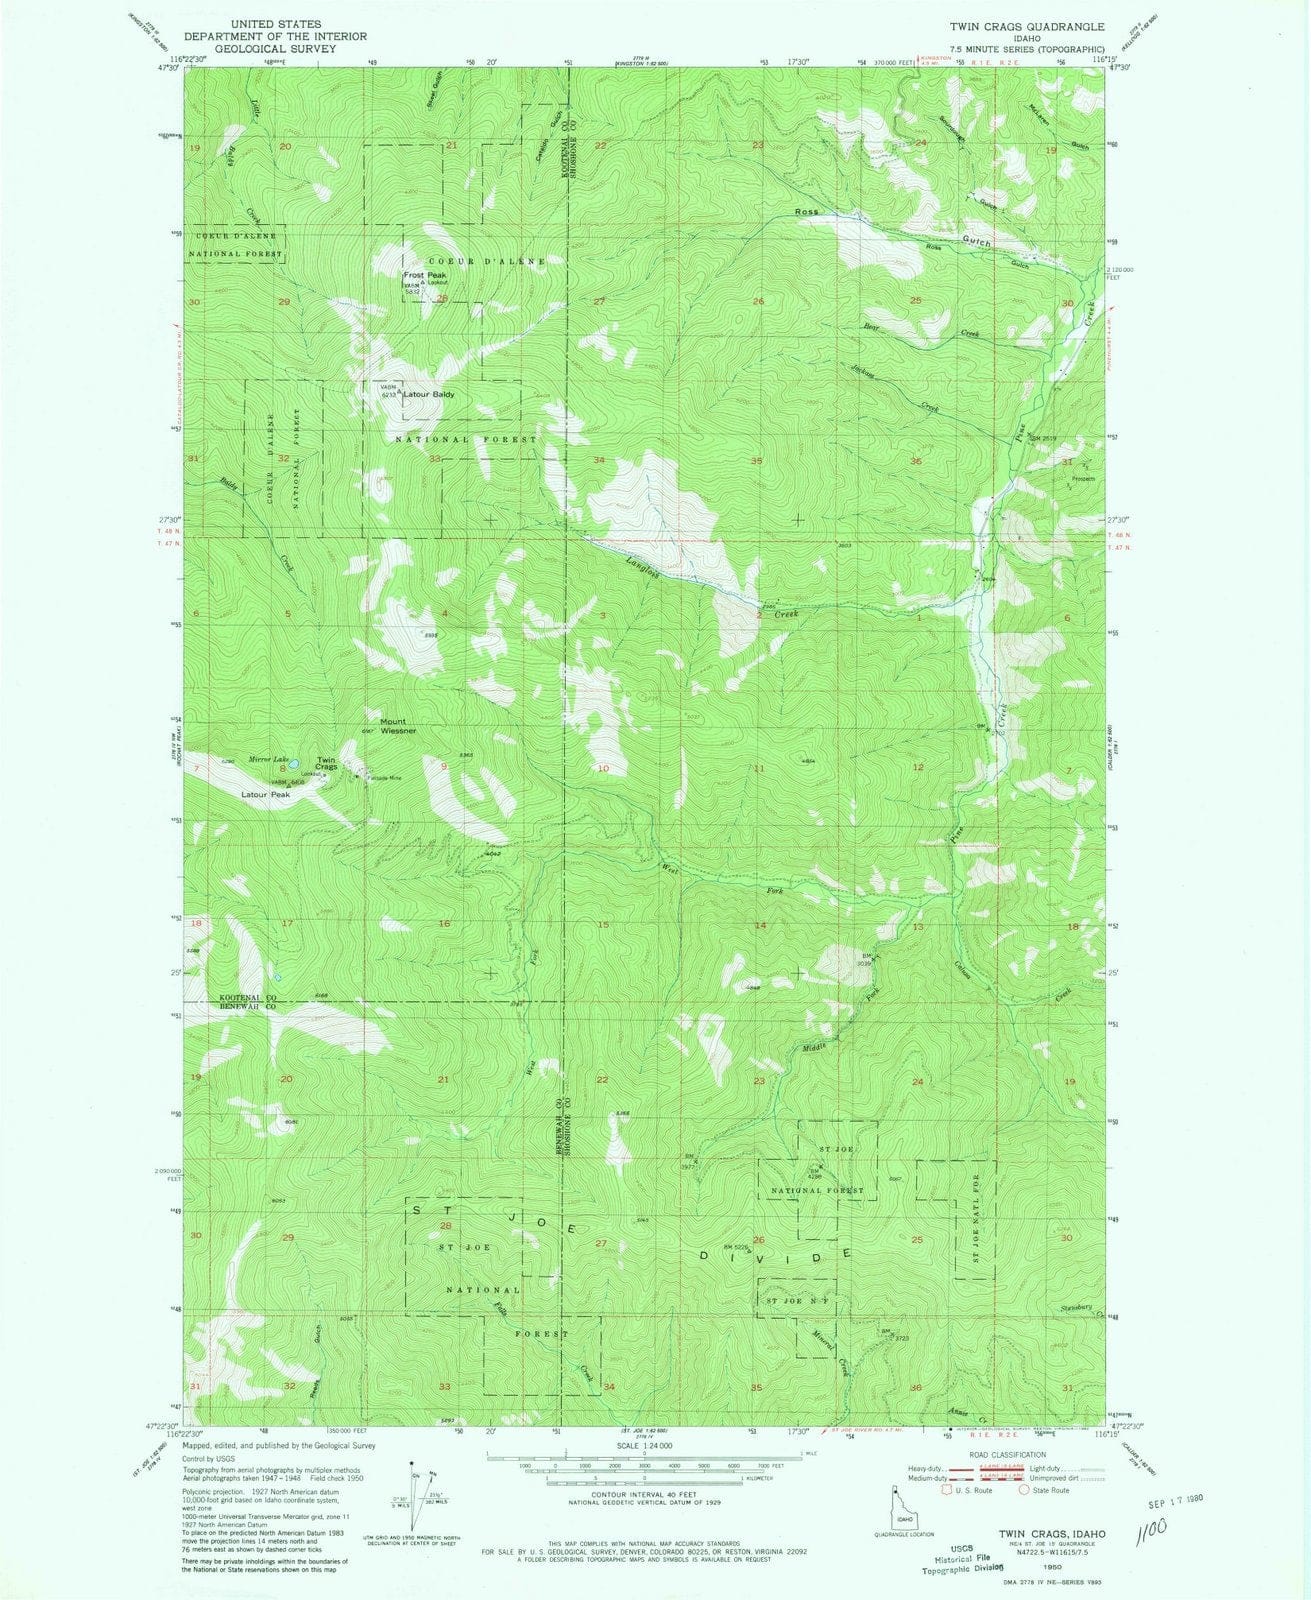 1950 Twin Crags, ID - Idaho - USGS Topographic Map